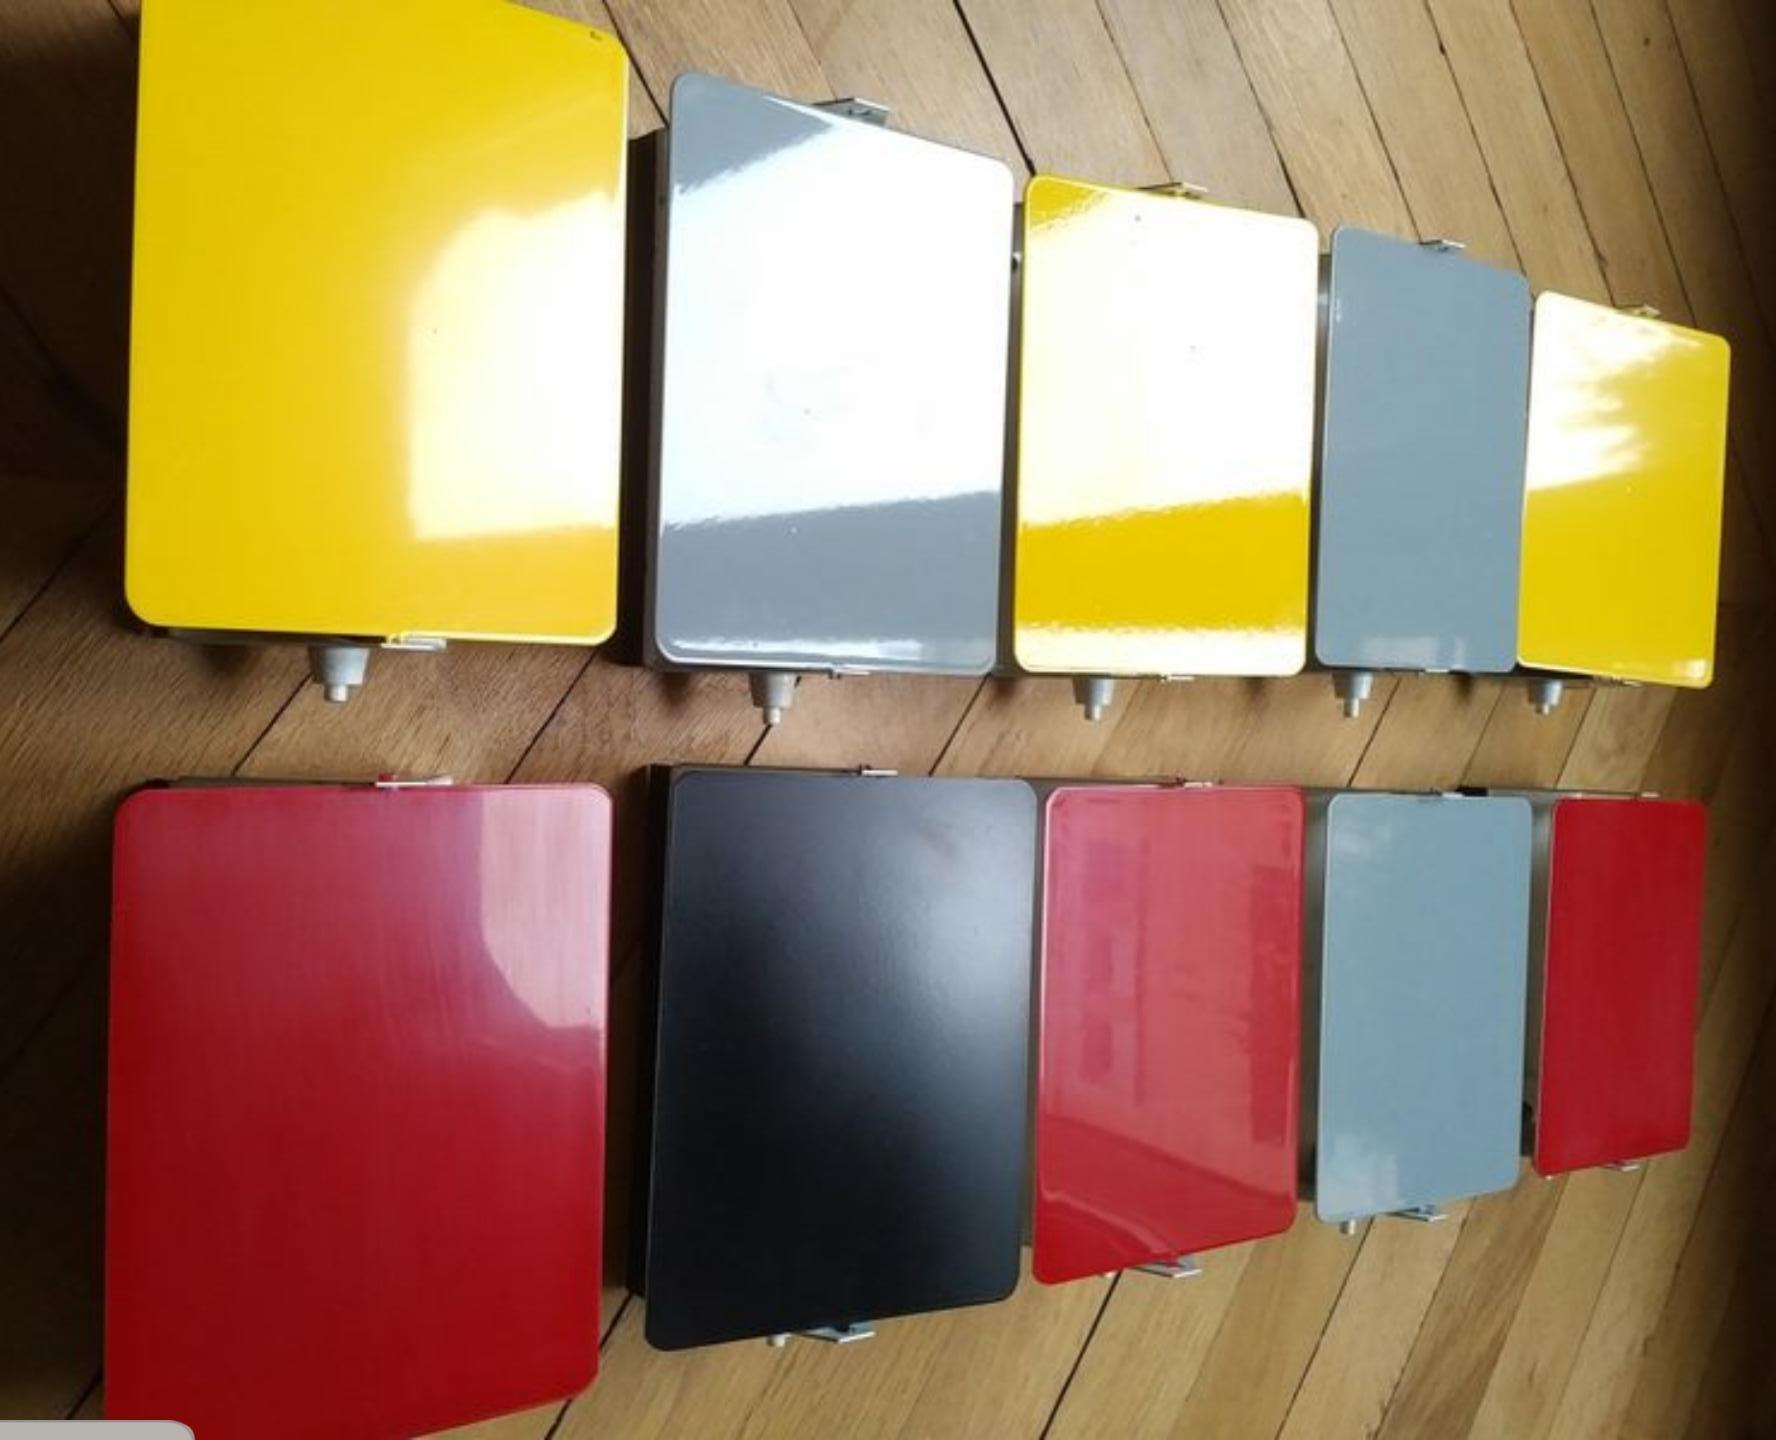 Charlotte Perriand CP1 iconic sconces. Designed for Les Arc ski resort in Savoy, France in 1962. They where produced by Steph Simon Gallery until the seventies. They are made of black, red or yellow painted metal and white metal on the back.
Several